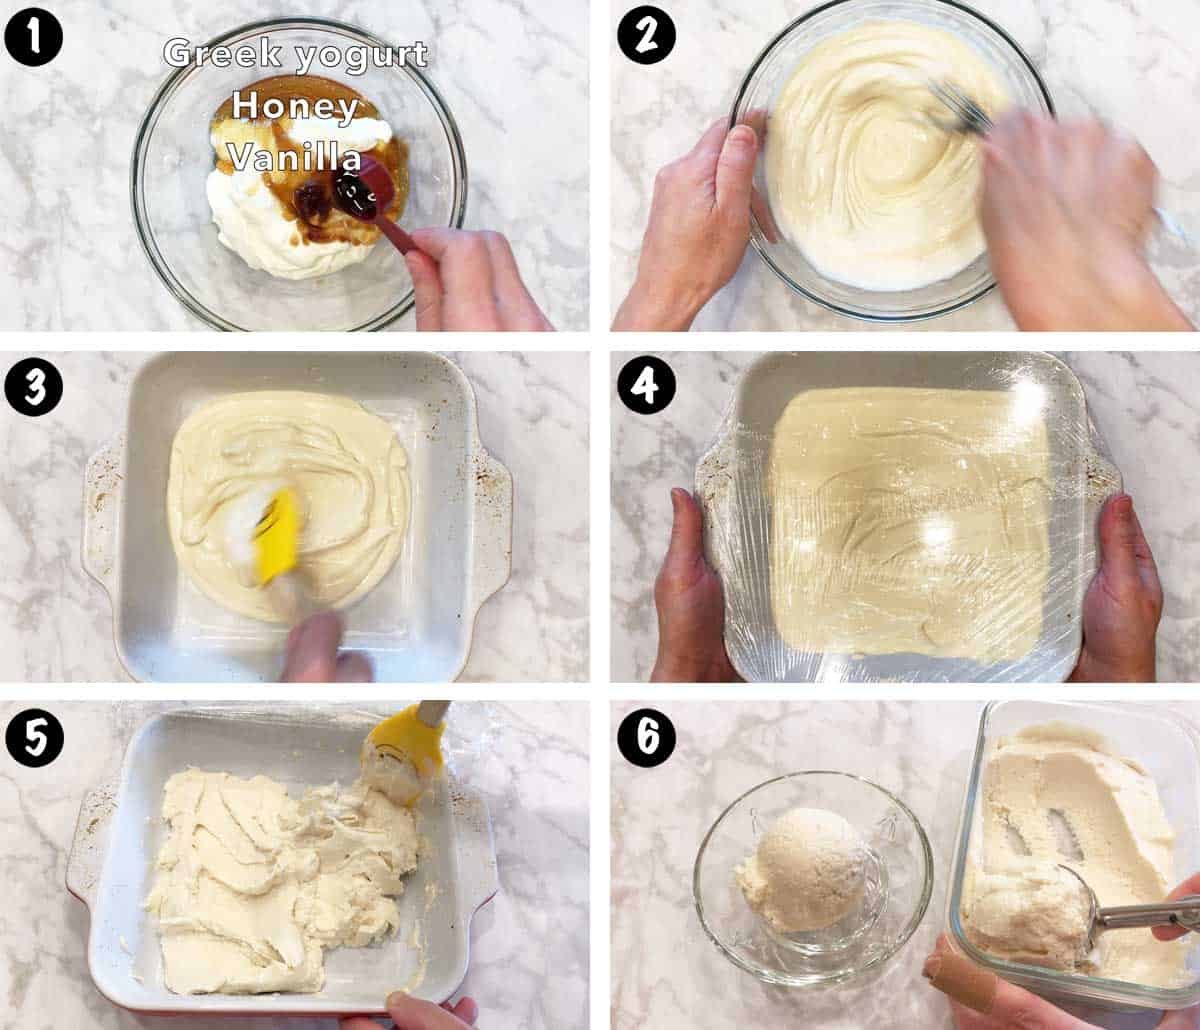 A six-photo collage showing the steps for making homemade frozen yogurt.  